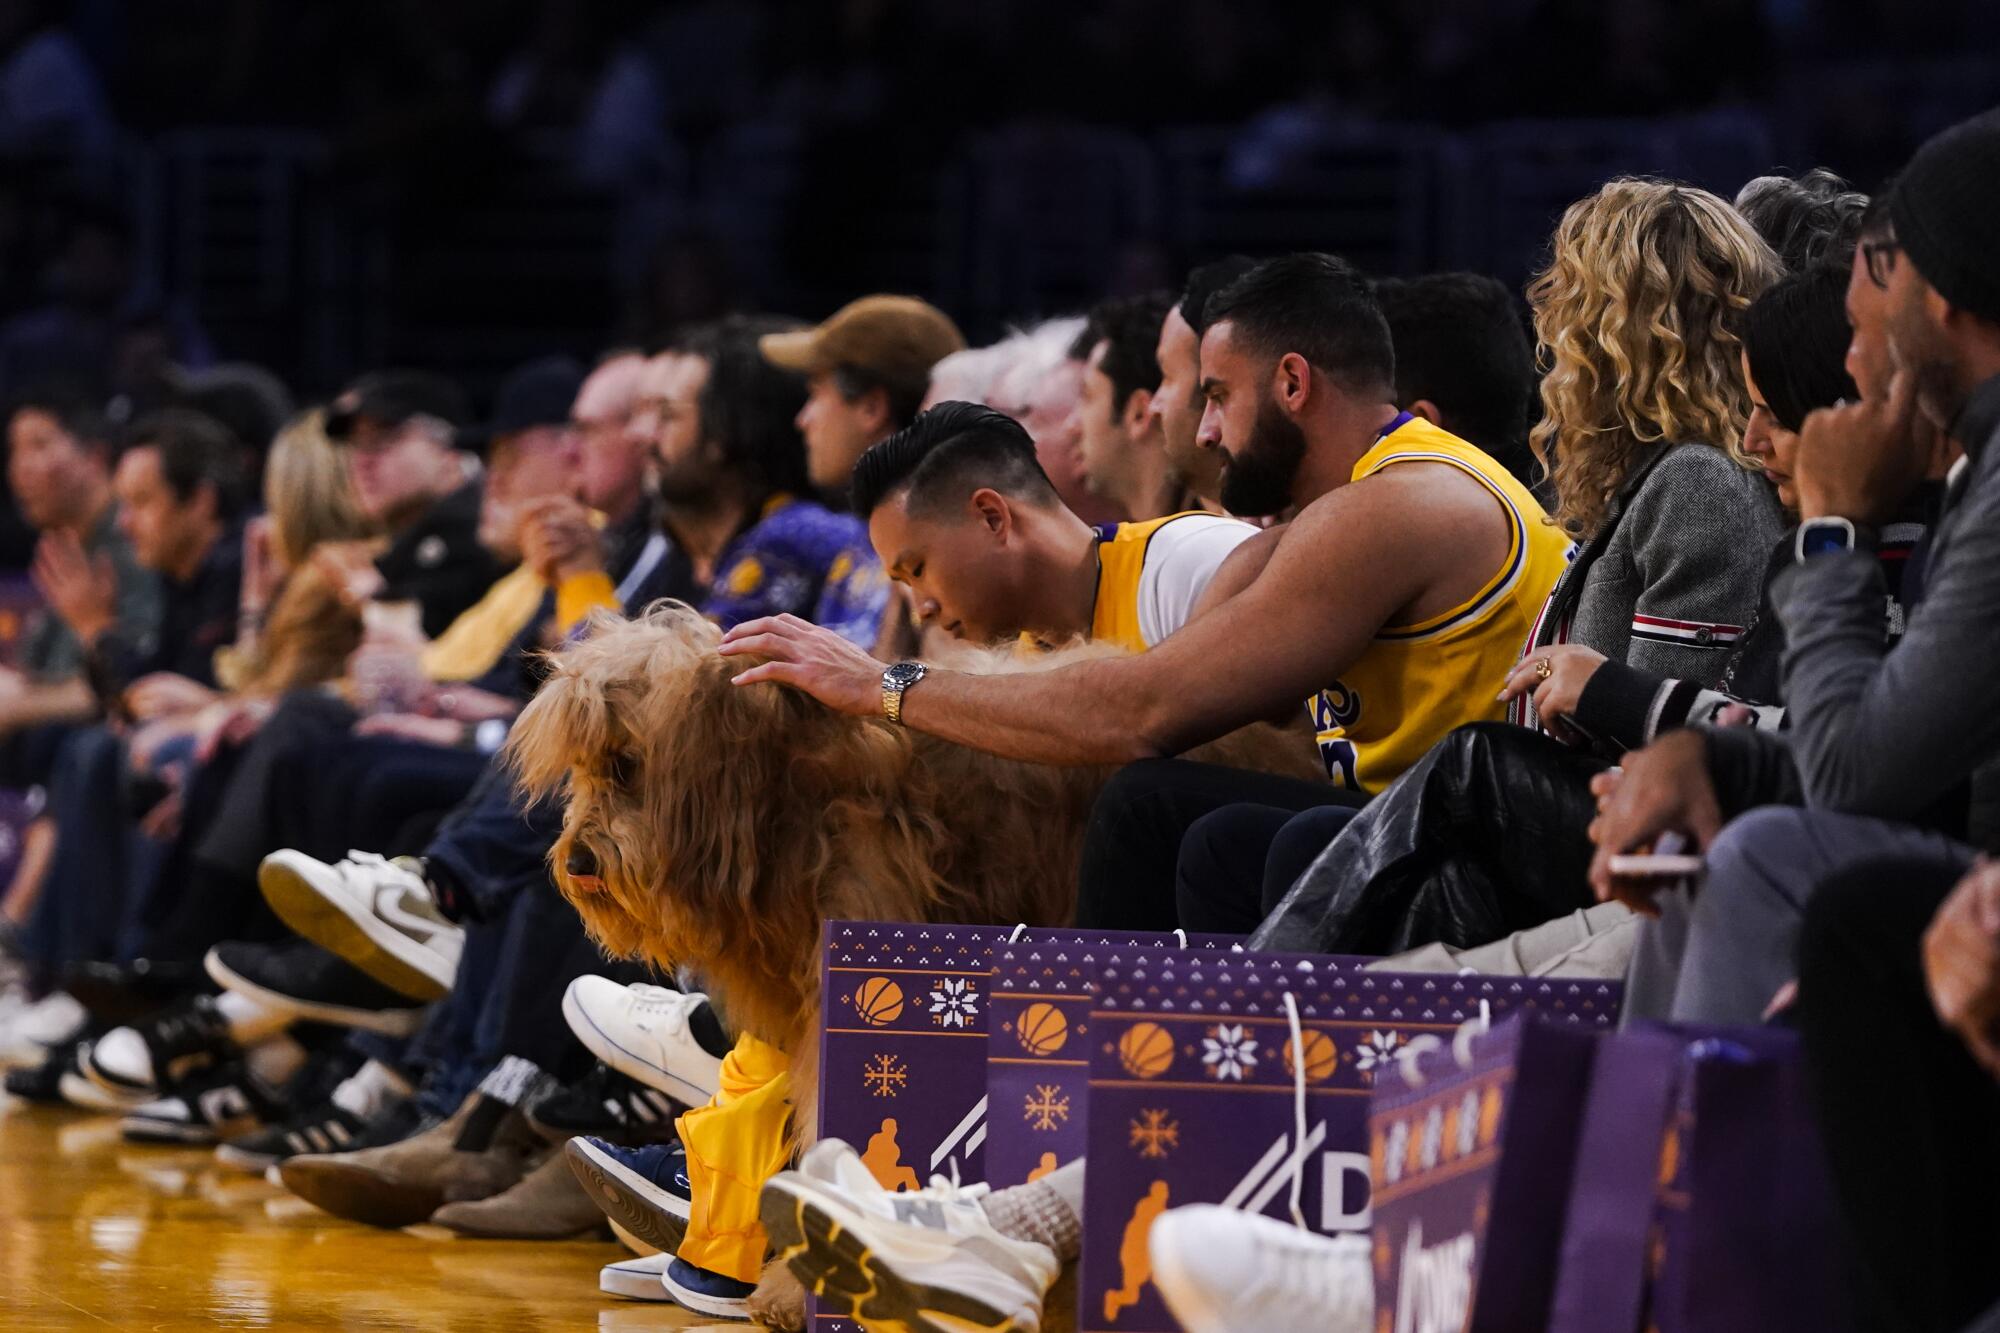 Cliff Brush Jr. scratches the head of Brodie the Goldendoodle as they sit courtside at the Lakers-Knicks game.  